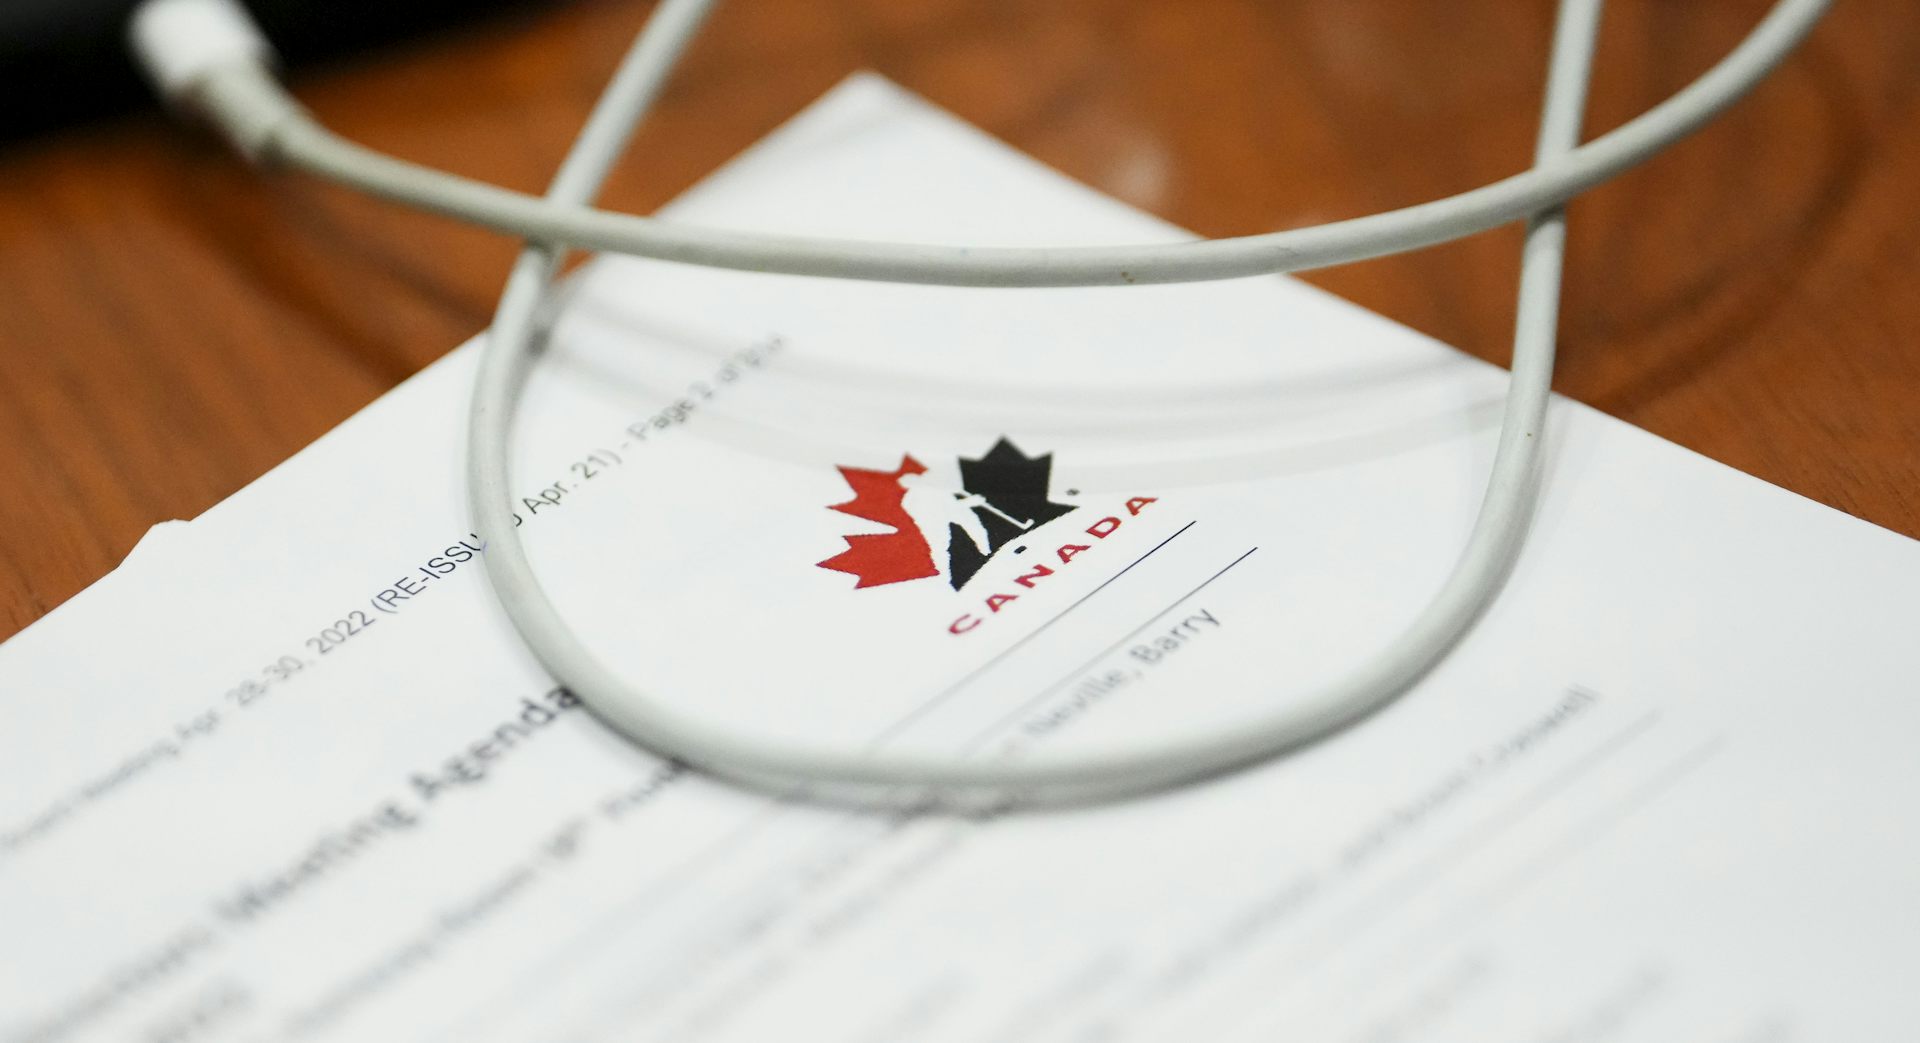 a document on a desk showing the Hockey Canada logo, a white sillhouetted hockey player against a red and navy blue Canadian maple leaf